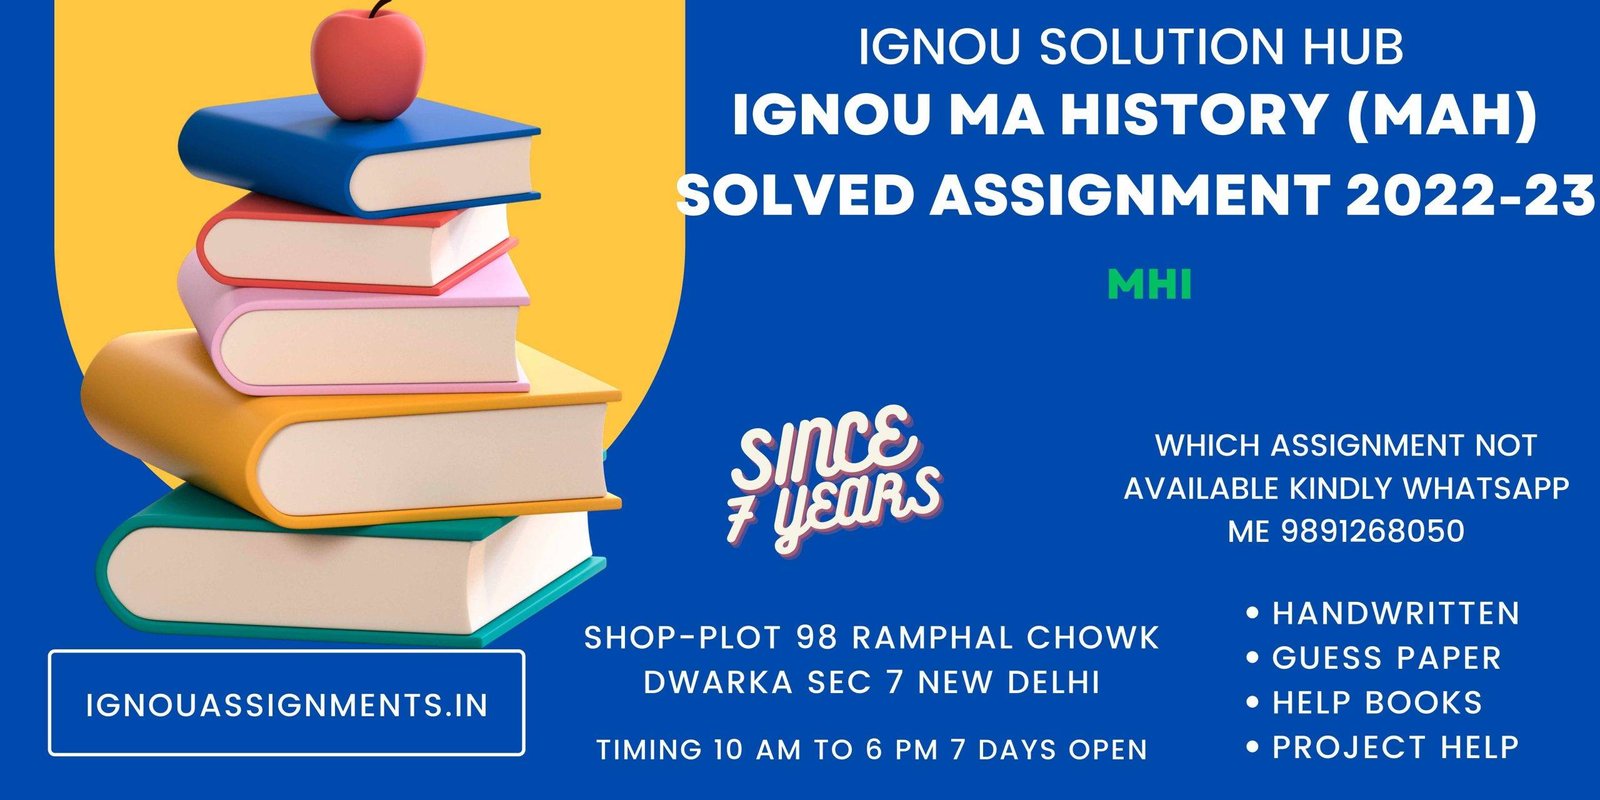 ignou history assignment 2022